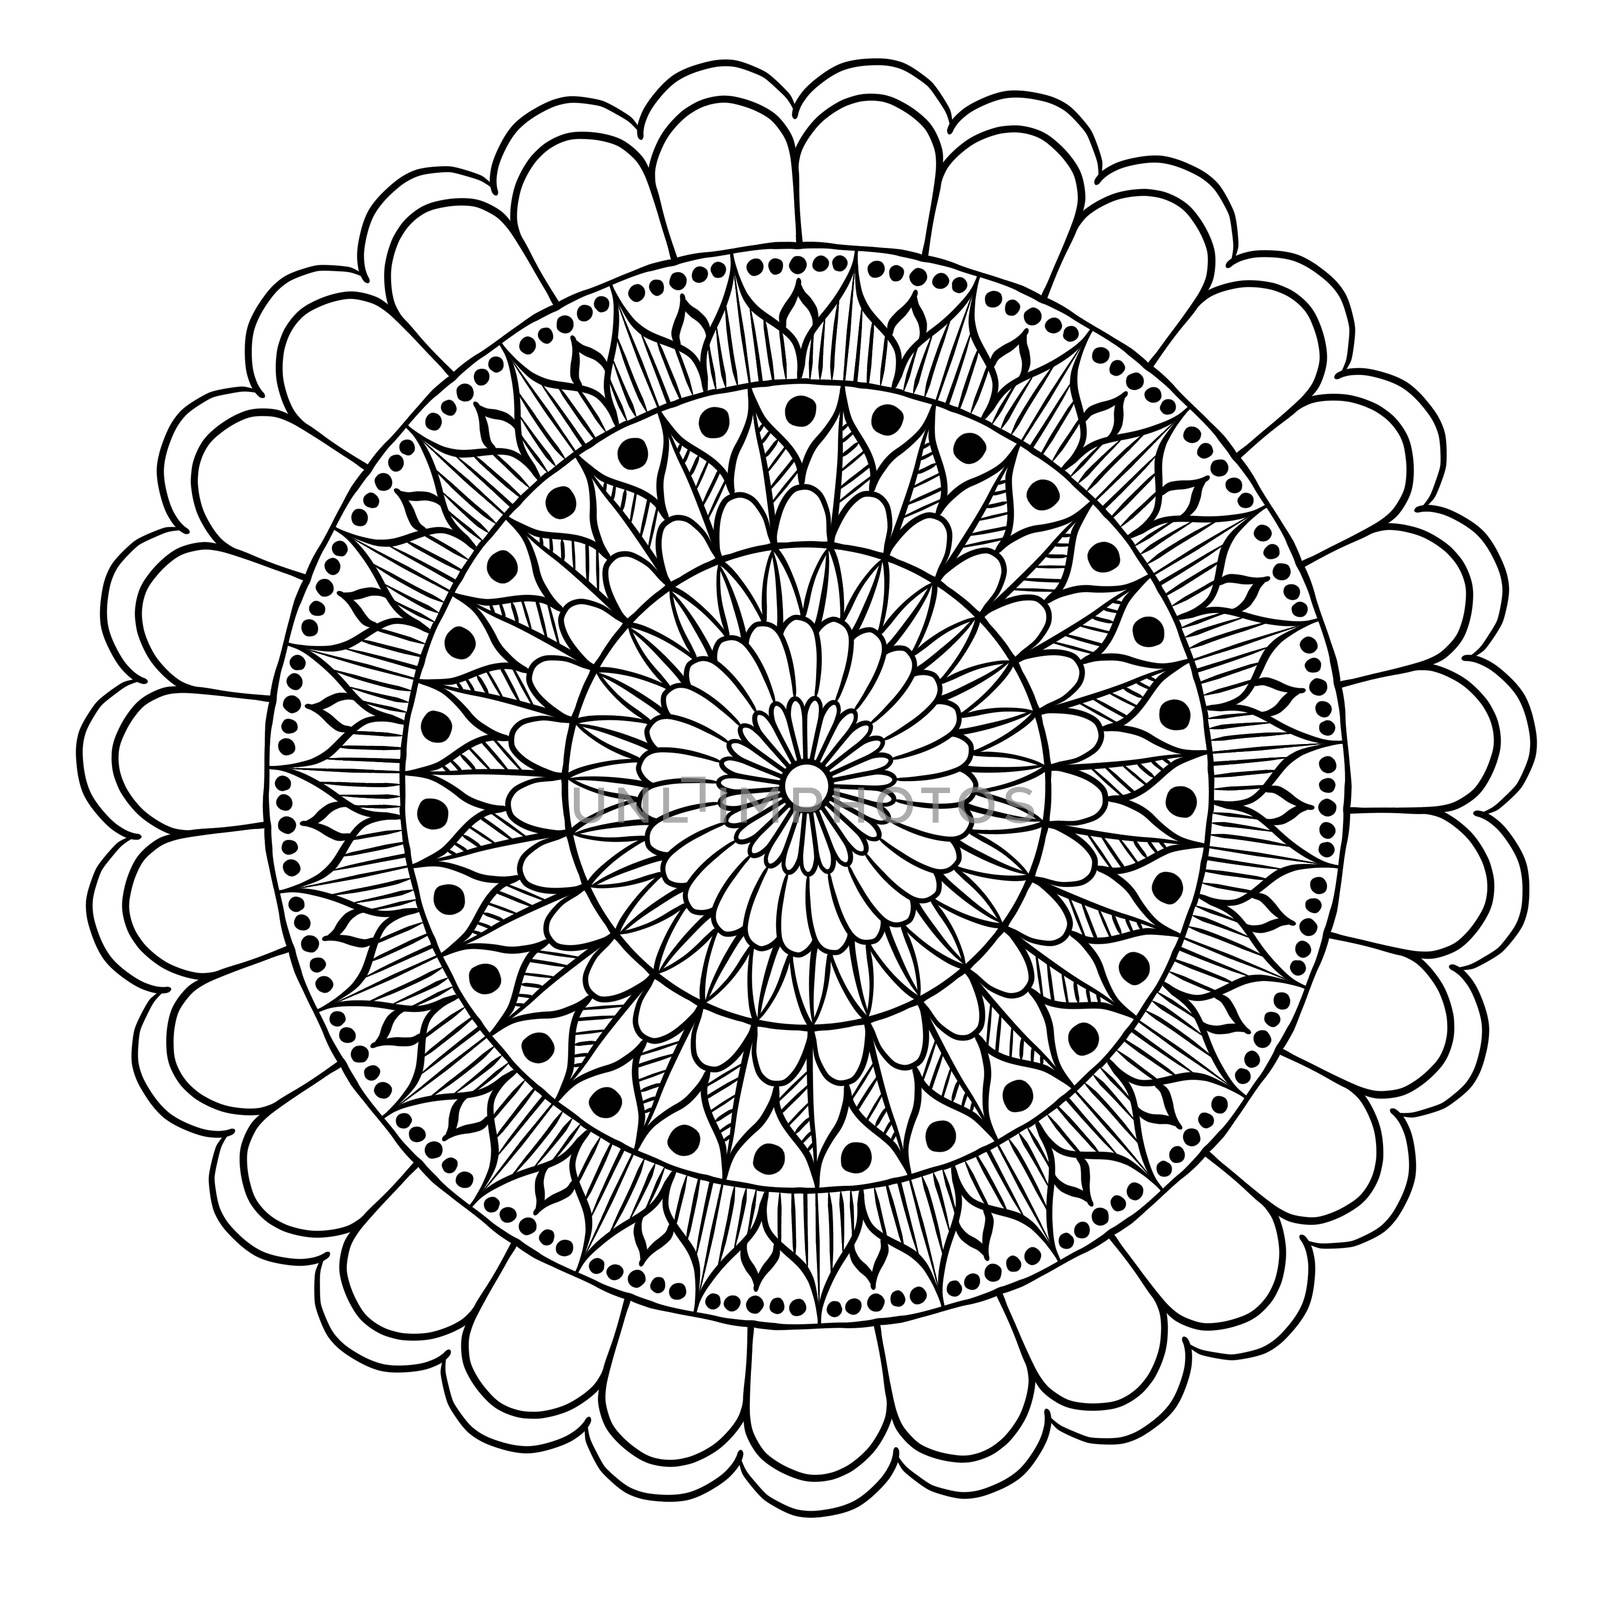 abstract with floral round lace mandala, decorative element in ethnic tribal style, black line art on a white background